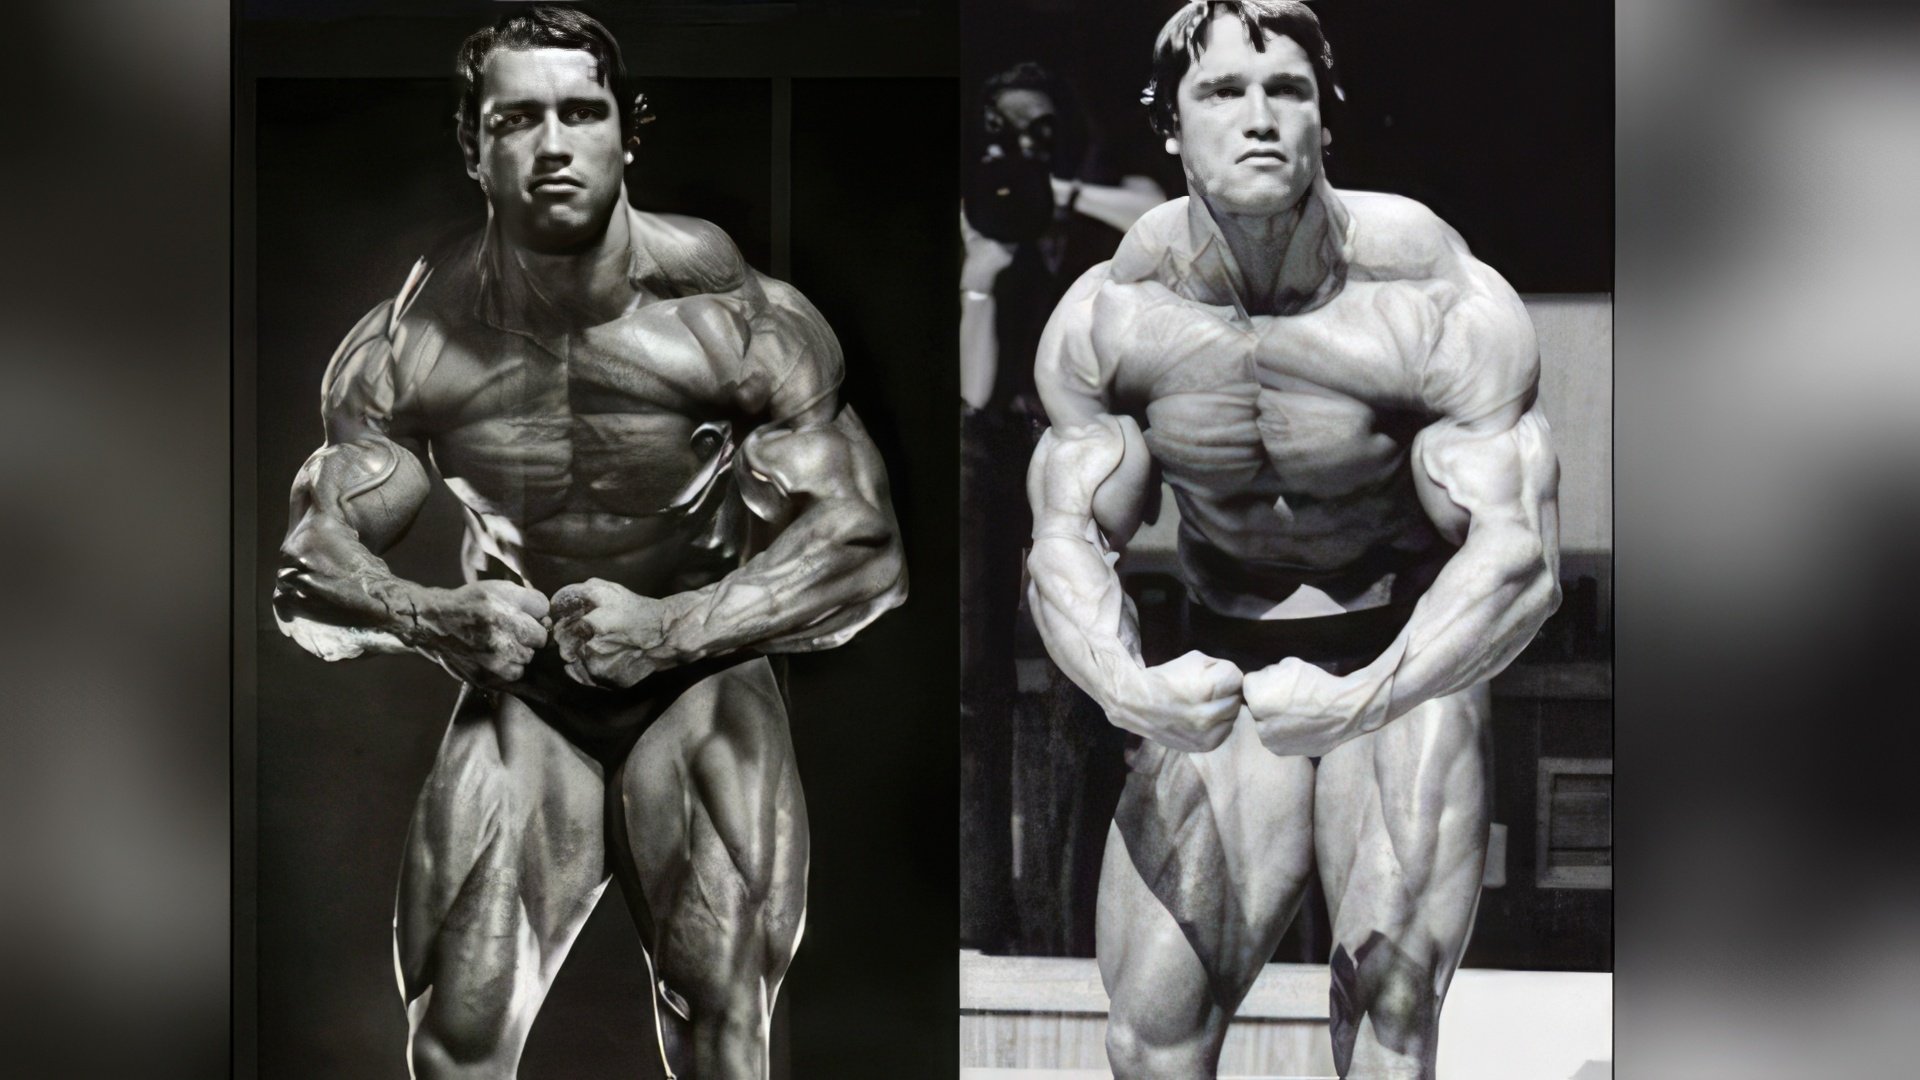 'Mr. Olympia' in 1974 and 1975